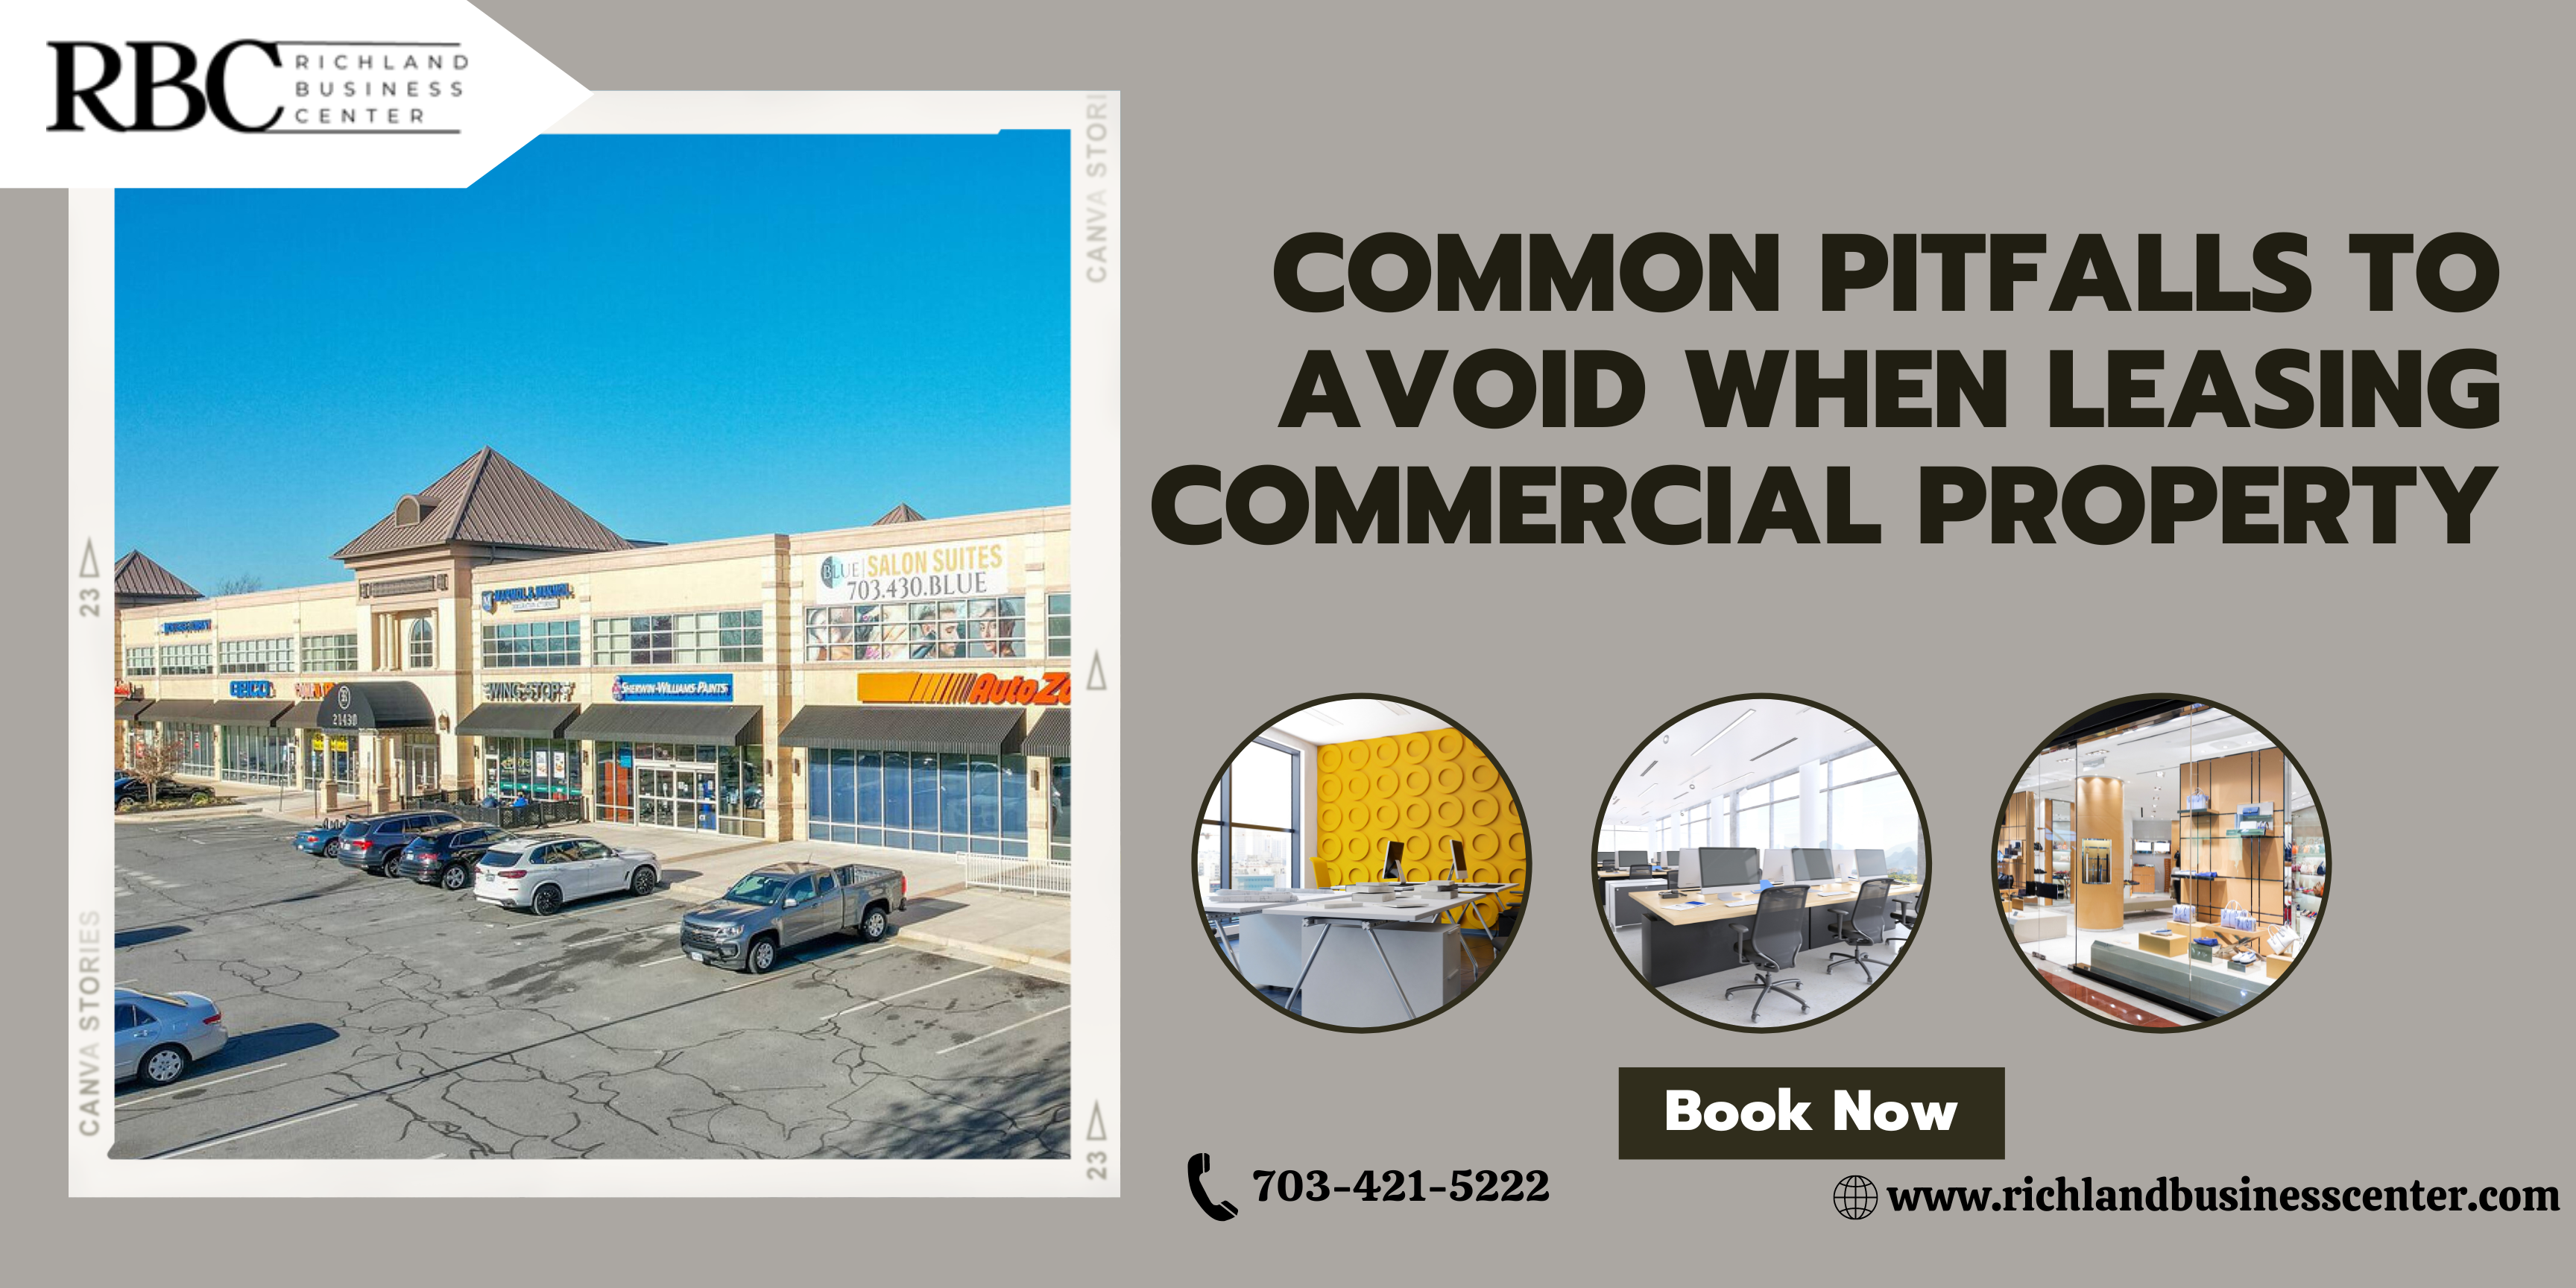 Common pitfalls to avoid when leasing commercial property